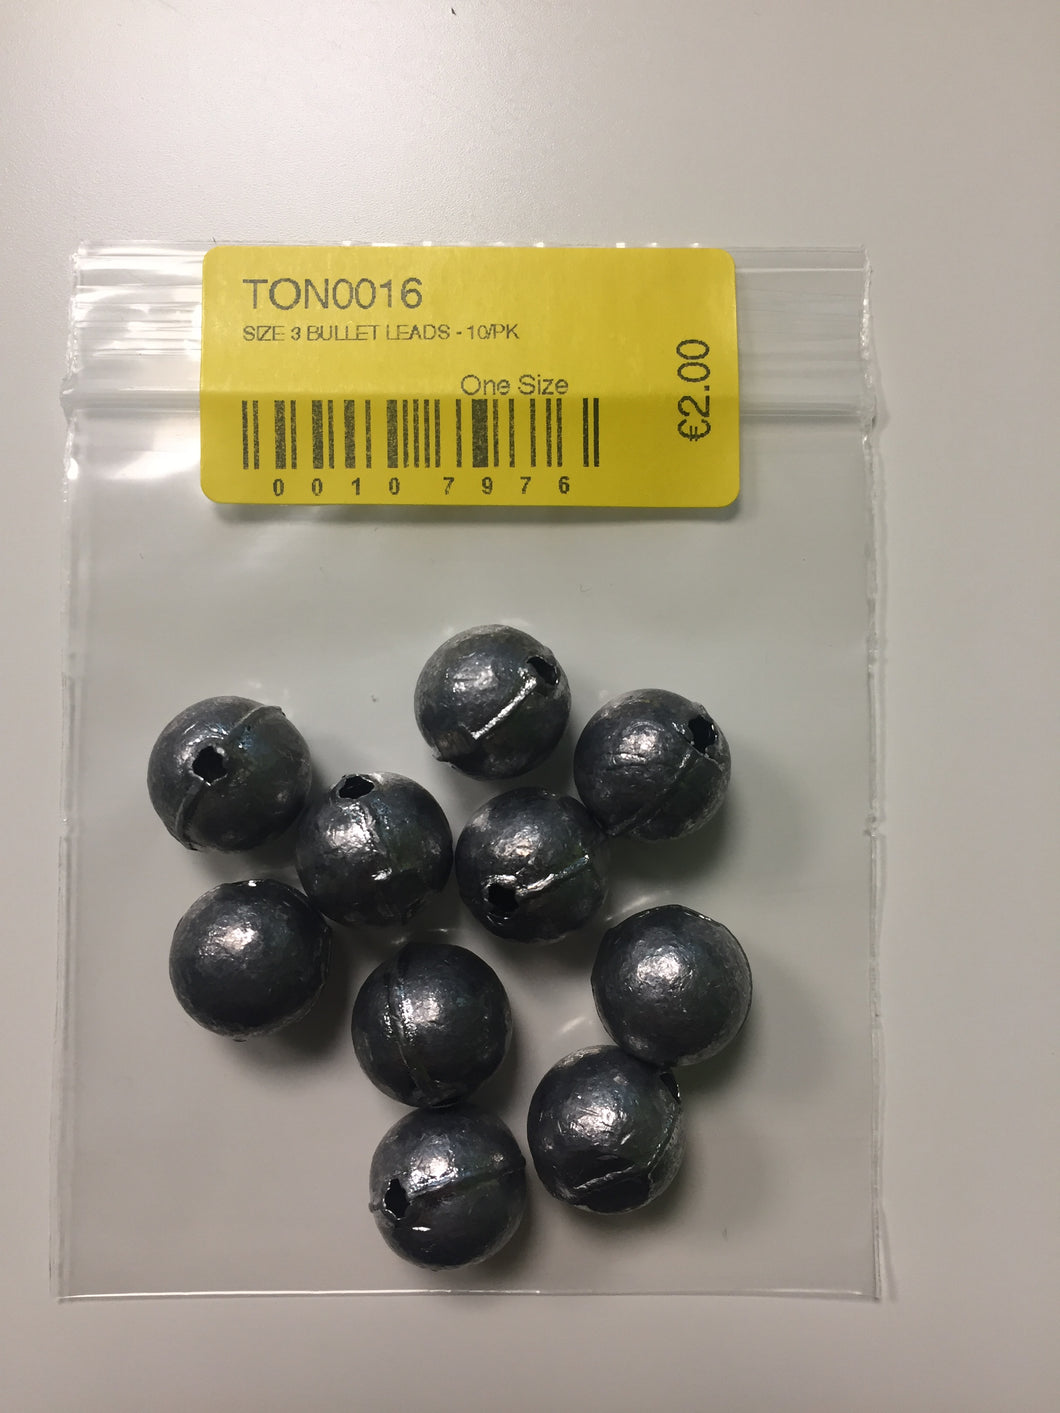 Size 3 Drilled Bullet Lead Weights (10 Pack)